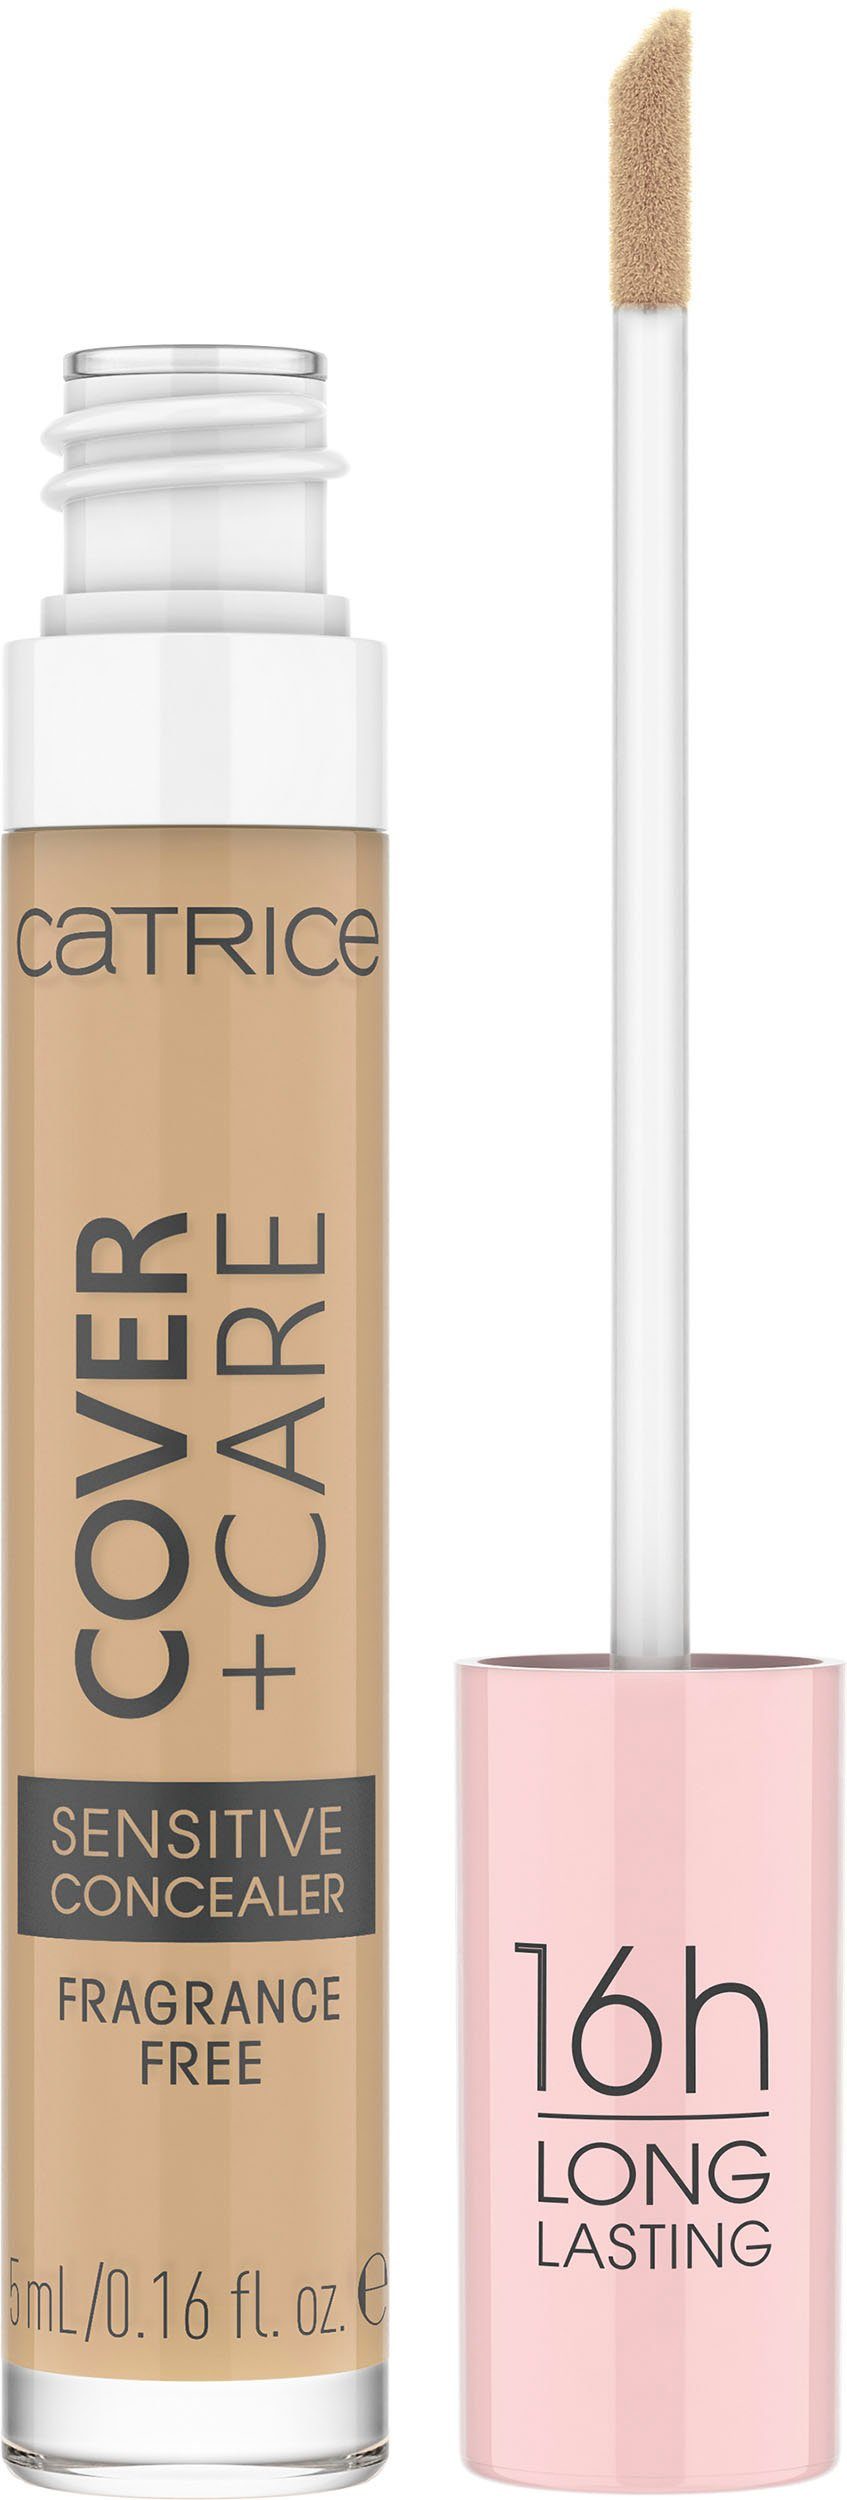 Catrice Concealer Catrice Cover + 3-tlg. nude Sensitive Care Concealer, 030N